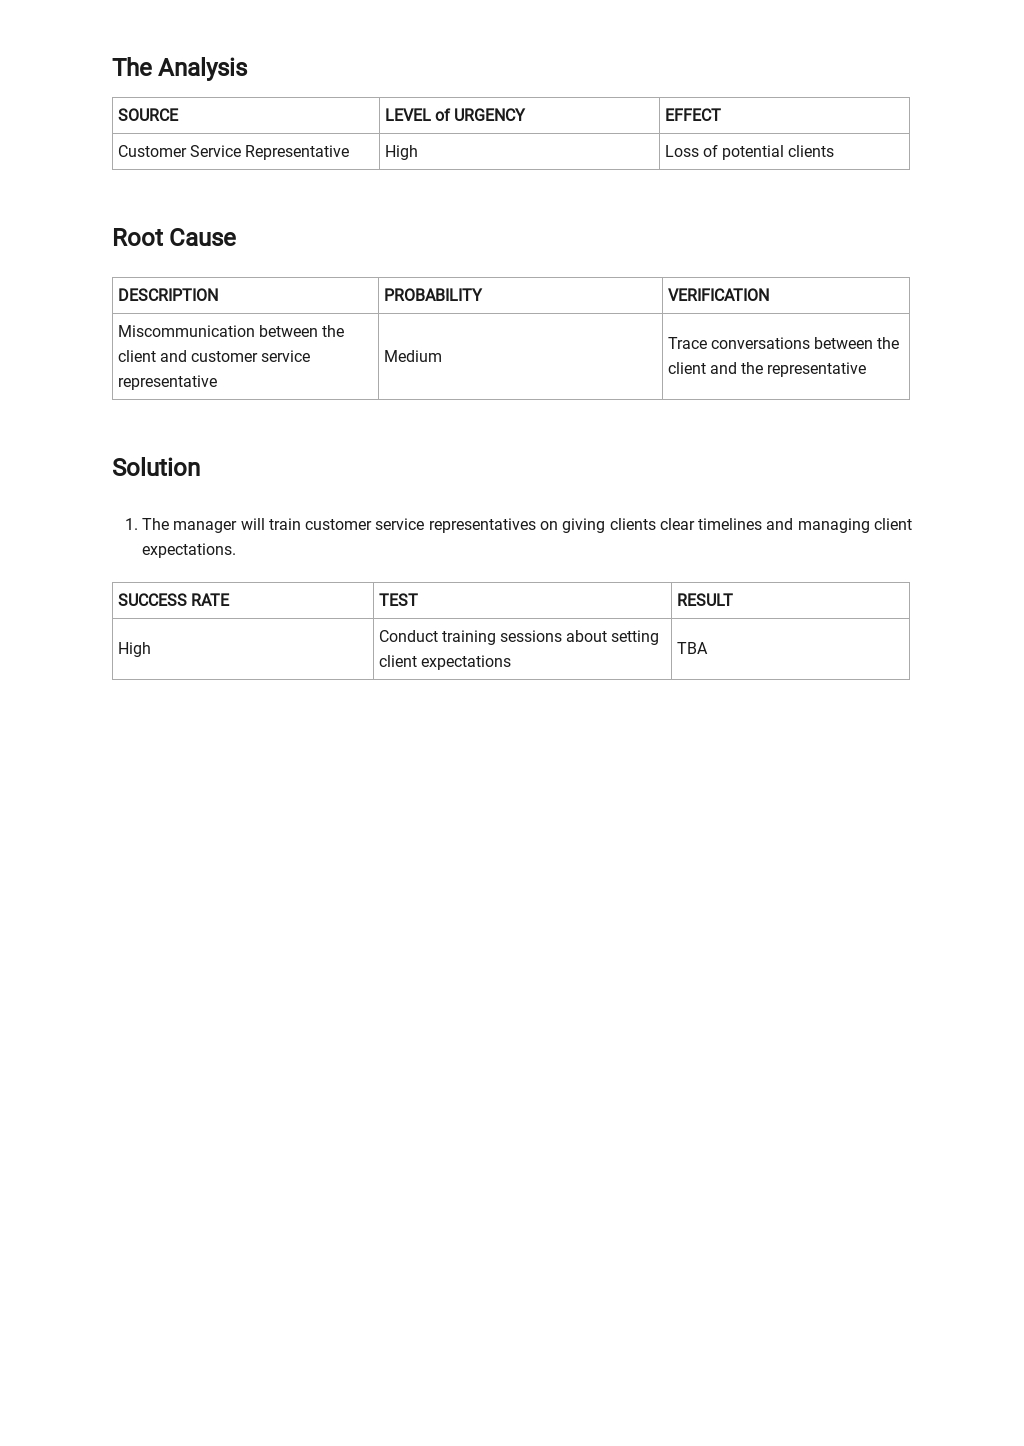 Incident Root Cause Analysis Template 2.jpe